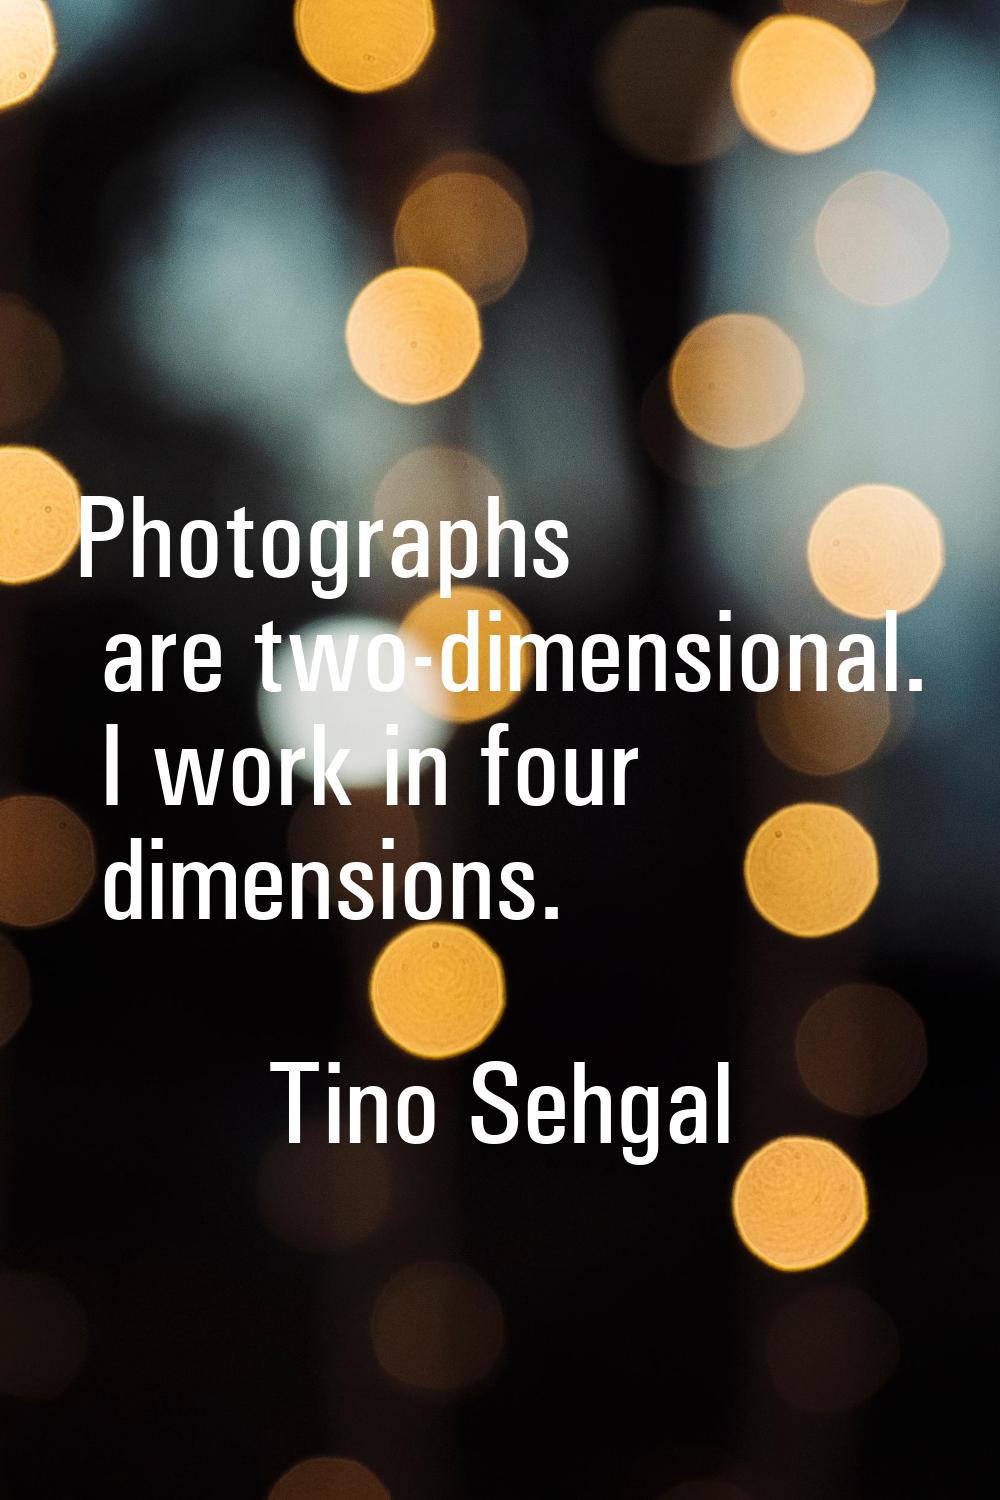 Photographs are two-dimensional. I work in four dimensions.